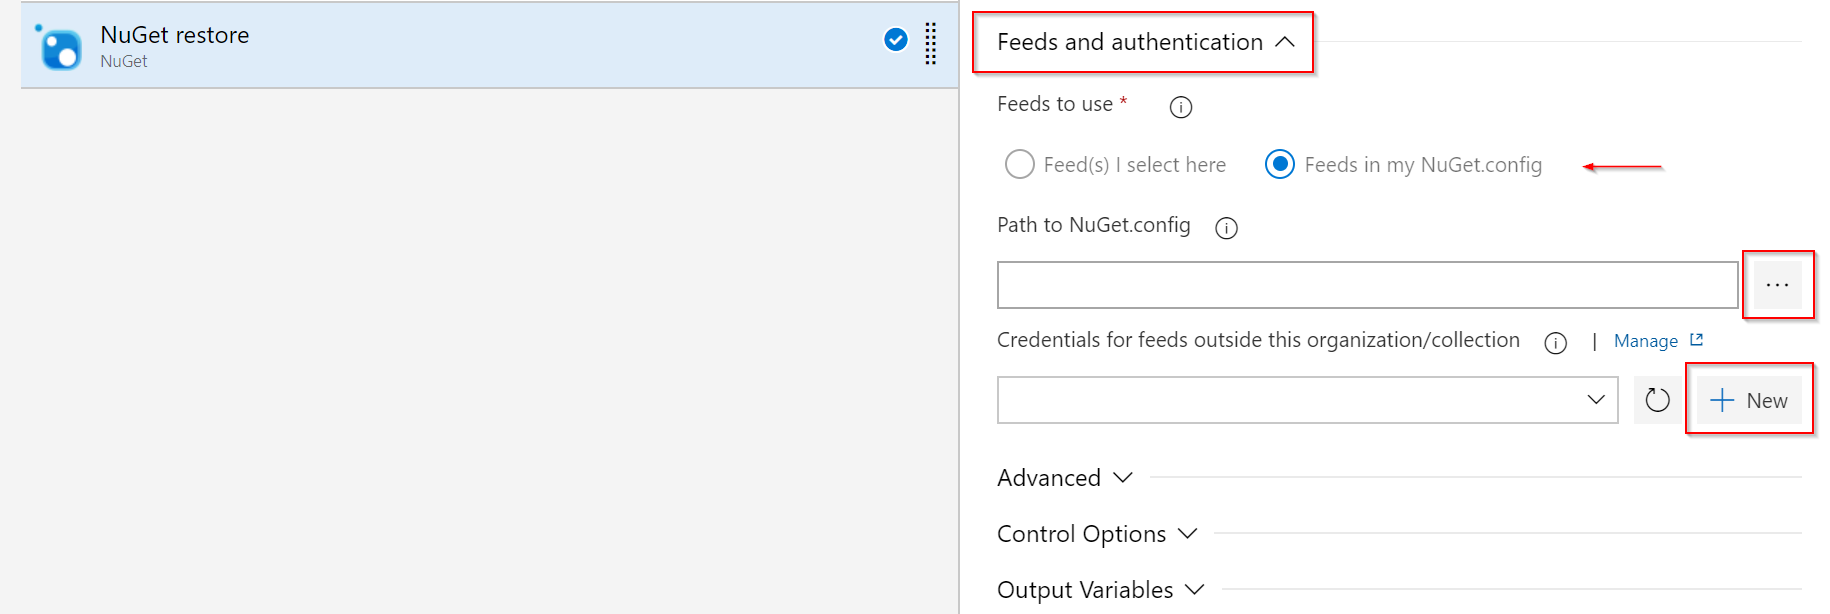 Screenshot showing how to configure the NuGet restore task.